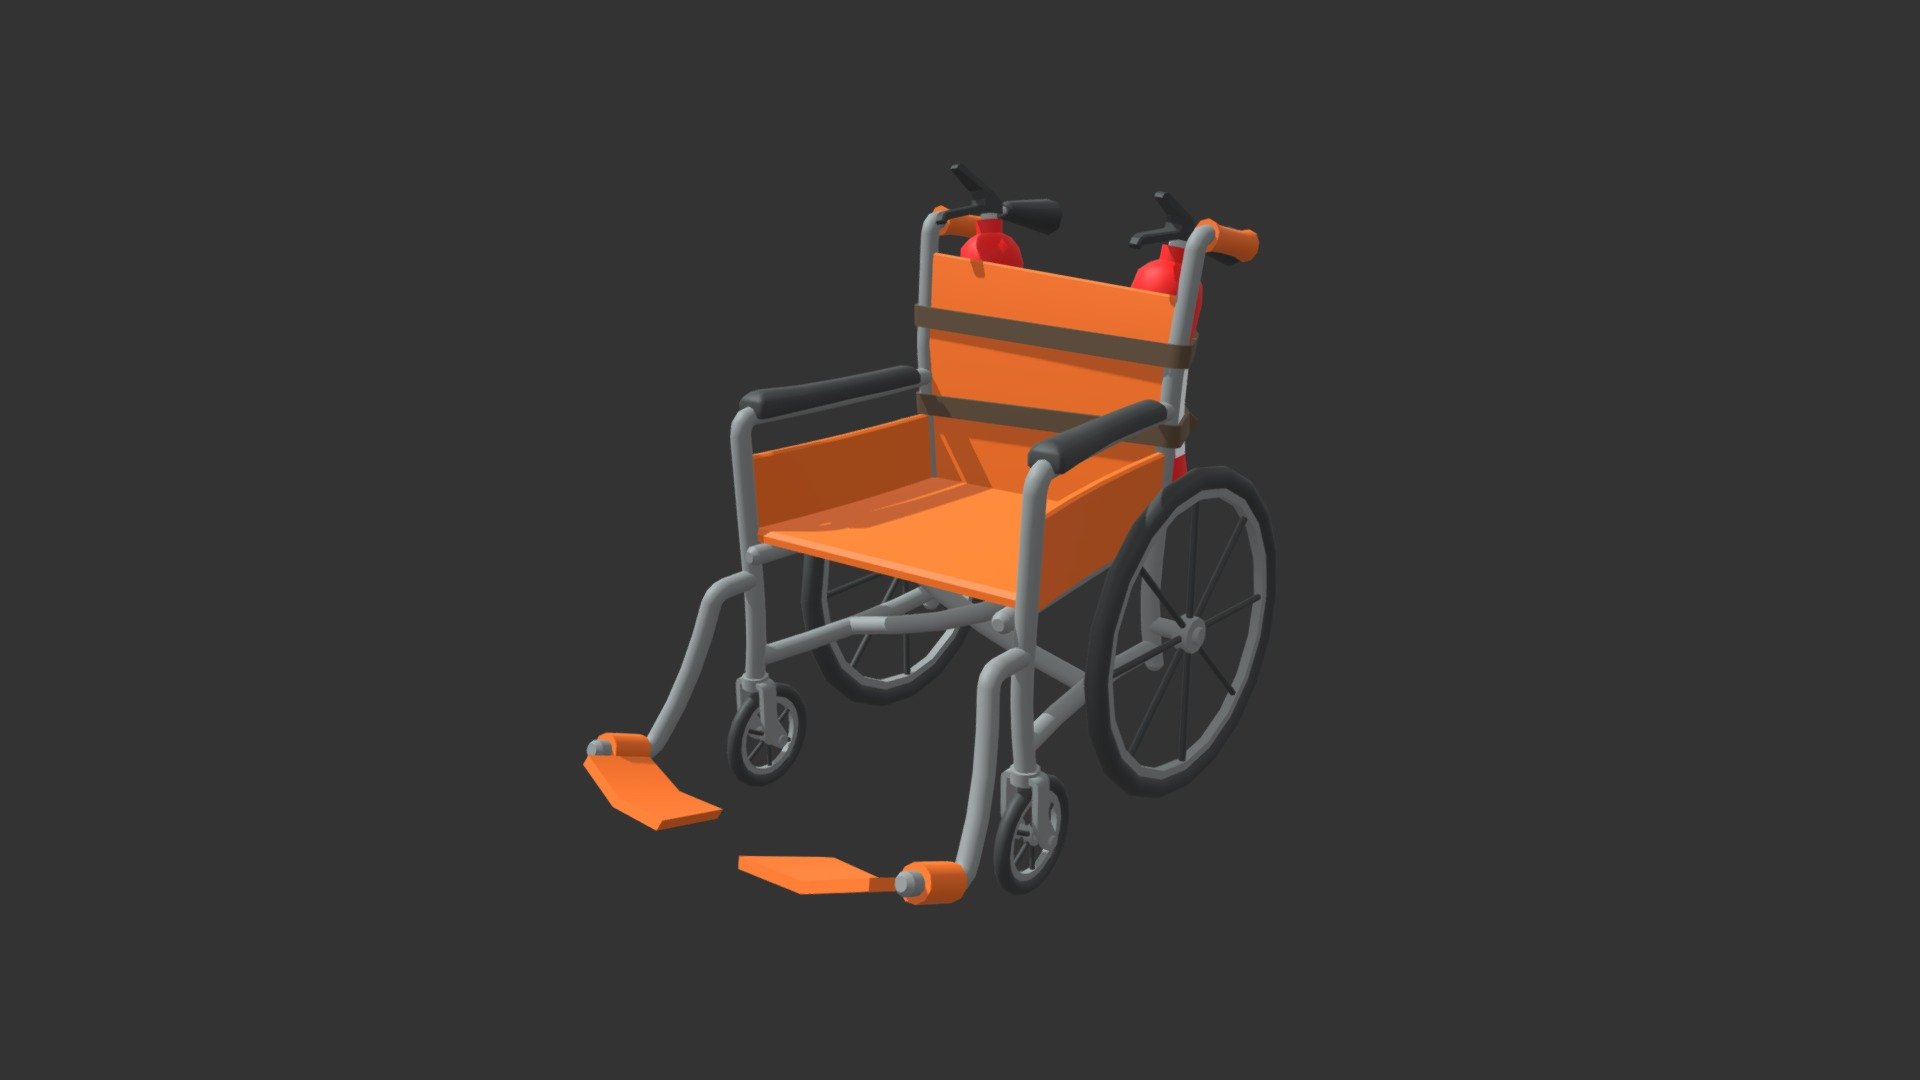 A model I made for a game project for my study. We had two weeks to make a game with a custom controller. We decided to strap buttons to a chair and make you play as an old guy in a weelchair within a retirement home.

This model is the wheelchair the main character sits in. It is inspired by the art made by David Puerta 3d model